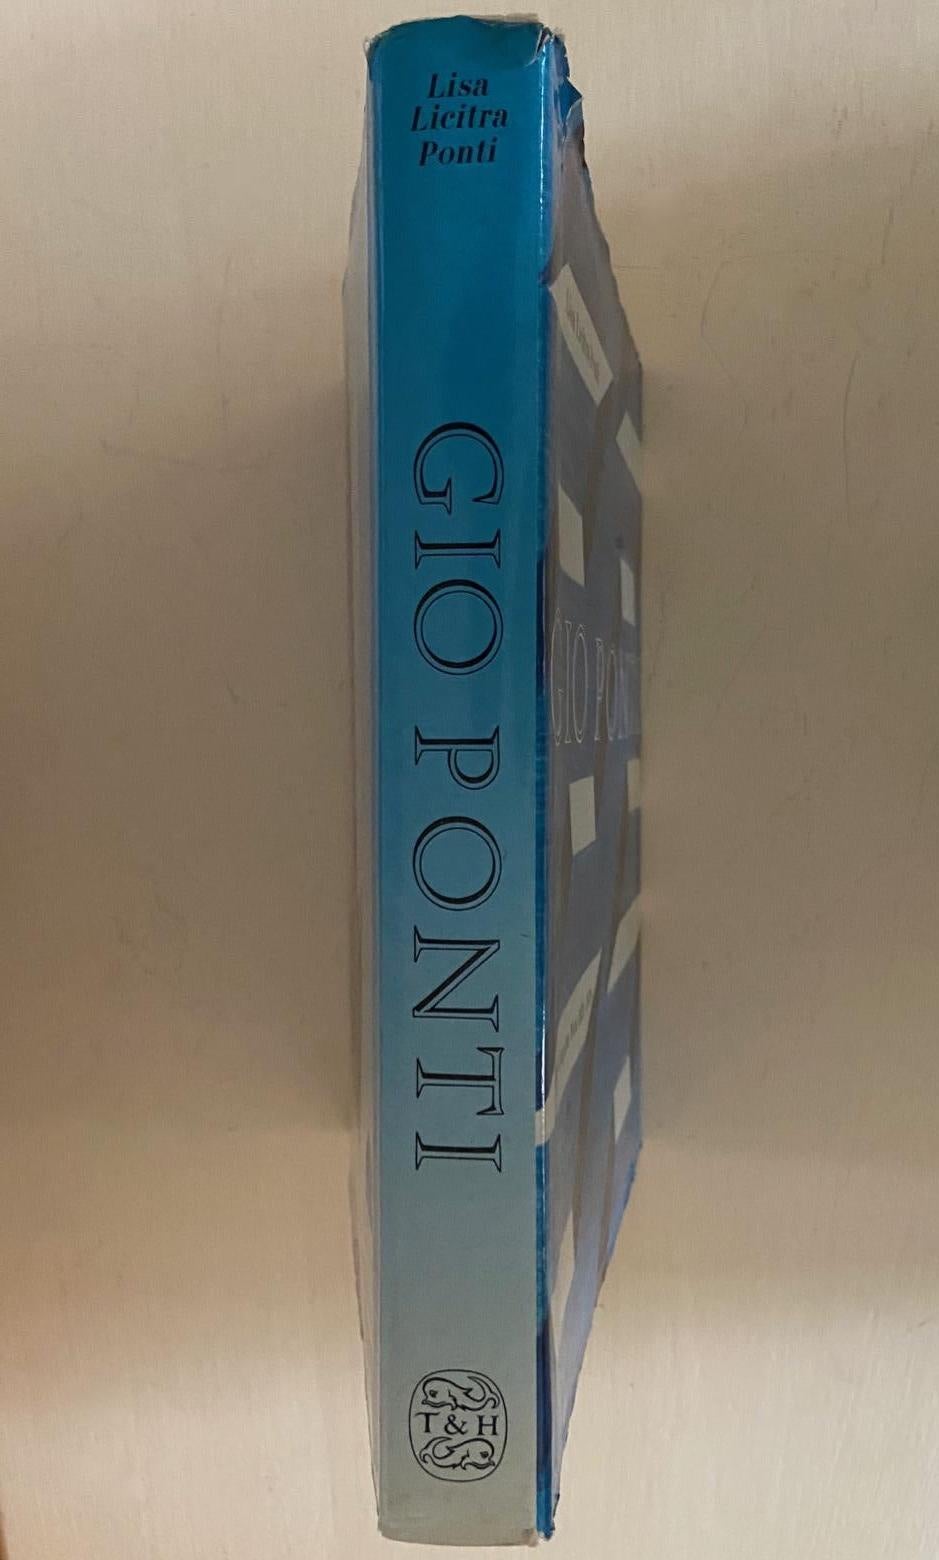 Gio Ponti, The Complete Work 1923-1978,  hardback book, 1990, Thames and Hudson For Sale 8